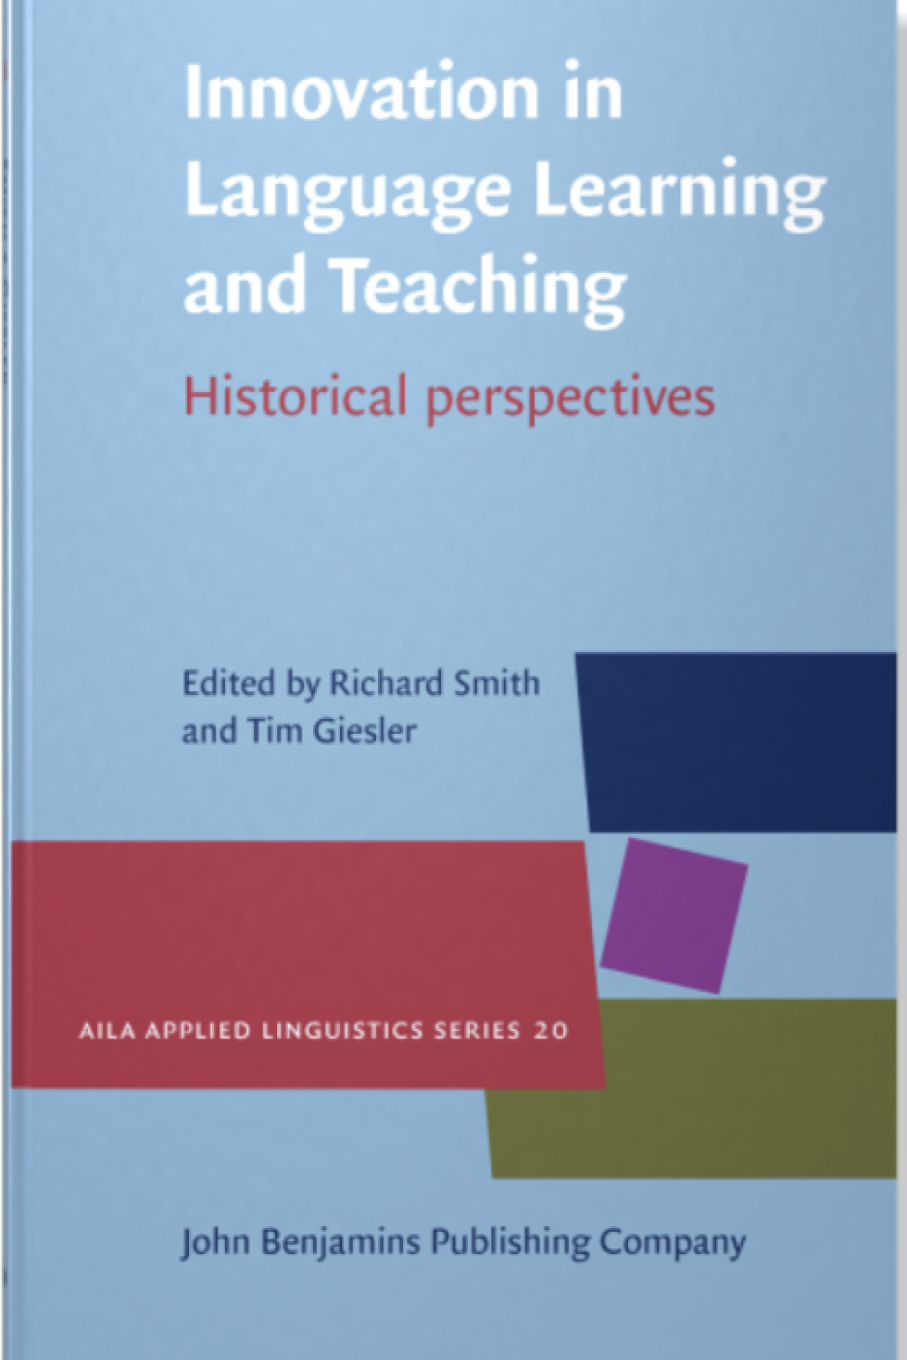 Innovation in Language Learning & Teaching book Cover